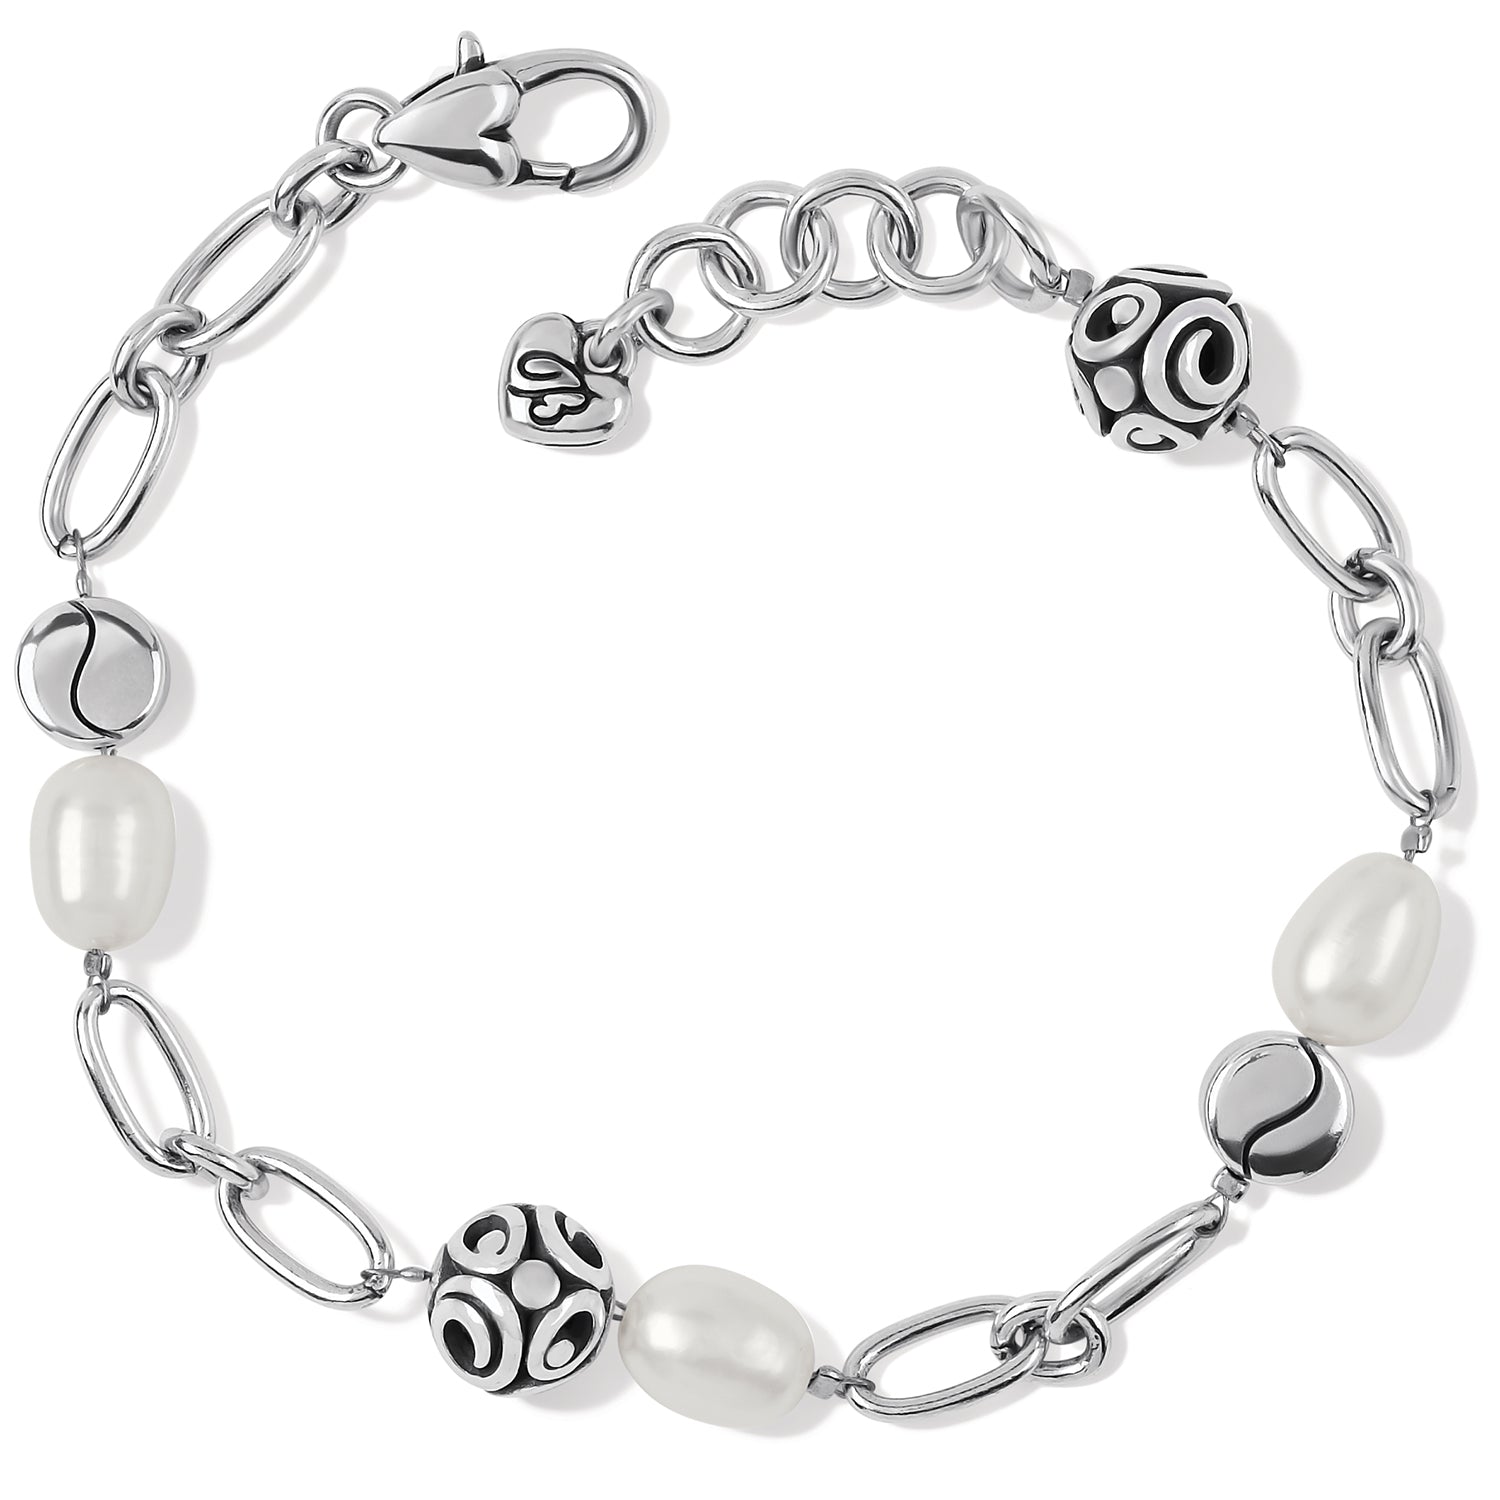 Contempo Pearl Bracelet by Brighton inspired by silver jewelry artisans of Taxco, Mexico. features silver beads in the Contempo design and pearls on oval link bracelet. Width: 1/2"  Length: 7 1/2" - 8 1/2" Adjustable. Shop at The Painted Cottage an Annapolis Boutique.